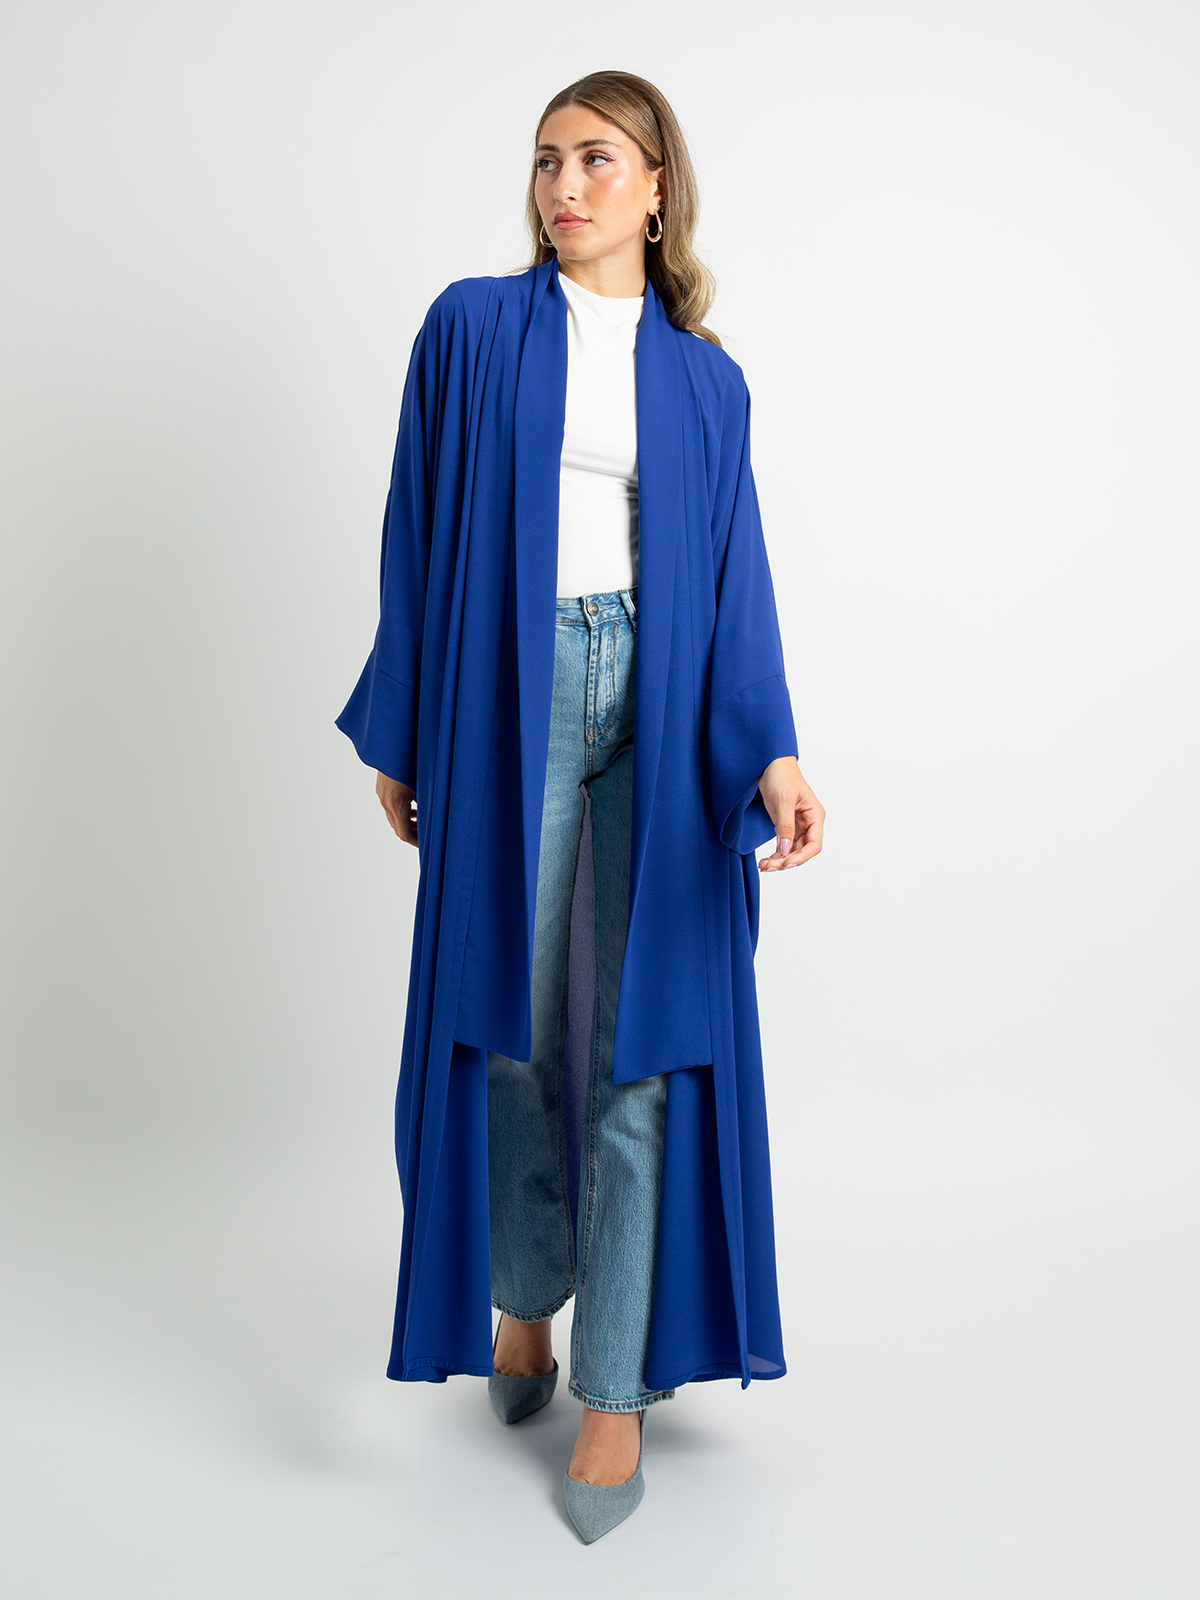 Indigo blue long open flowstyle wide fit abaya in high quality light fabric by kaafmeem for work and everyday wear 